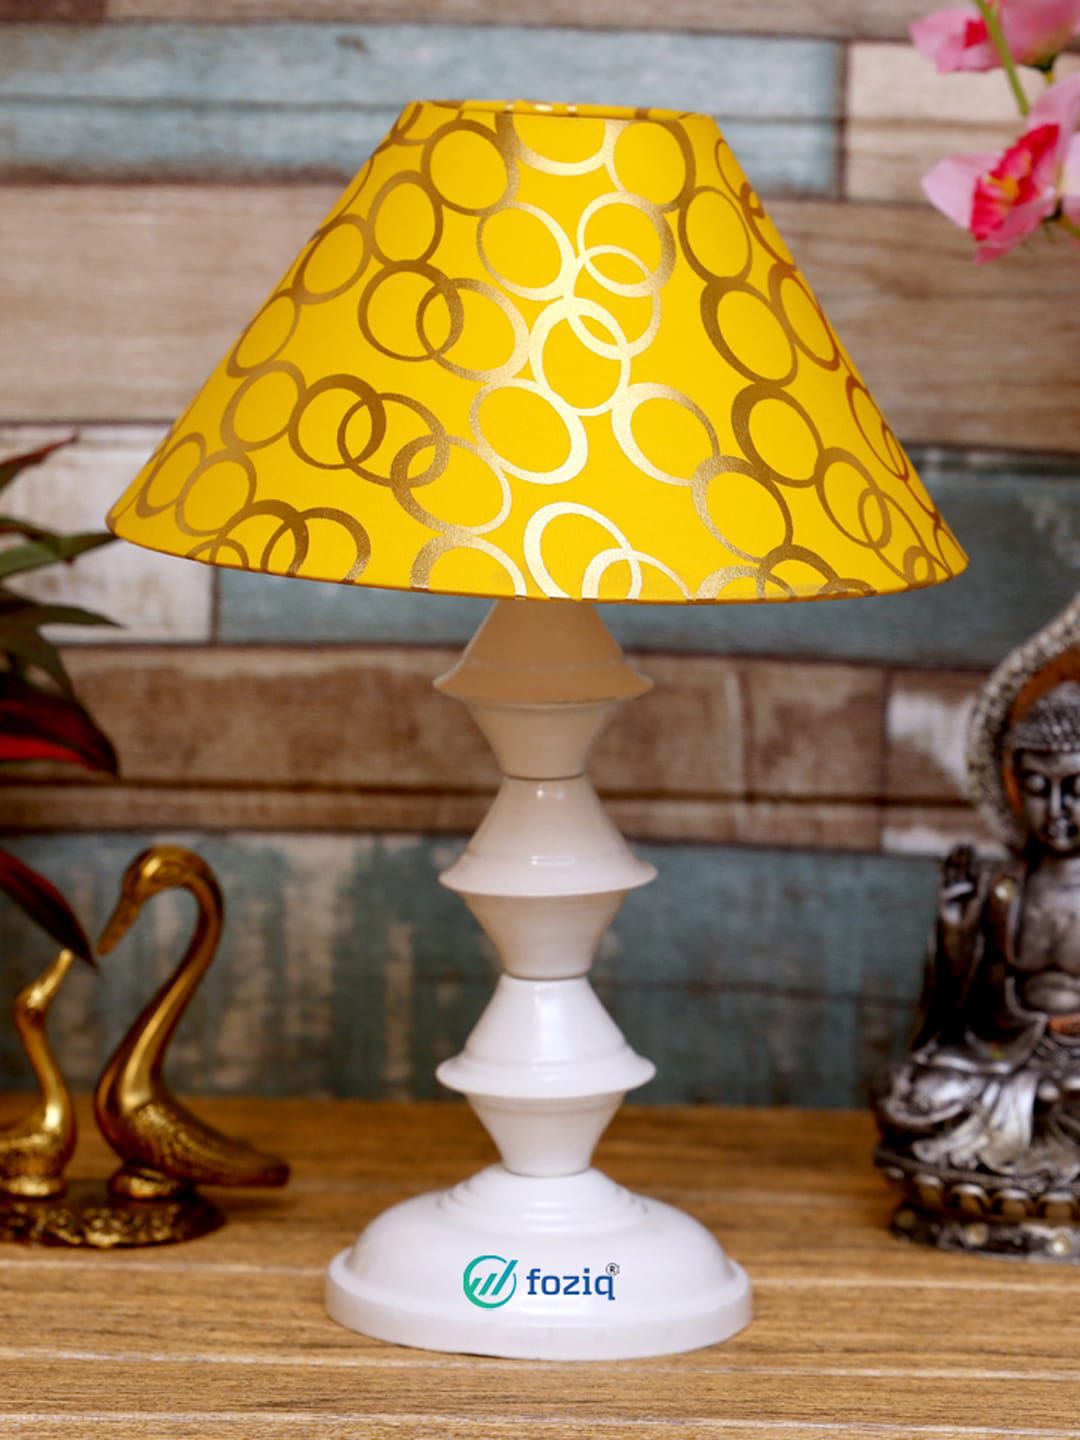 foziq White & Yellow Printed Table Lamp Price in India